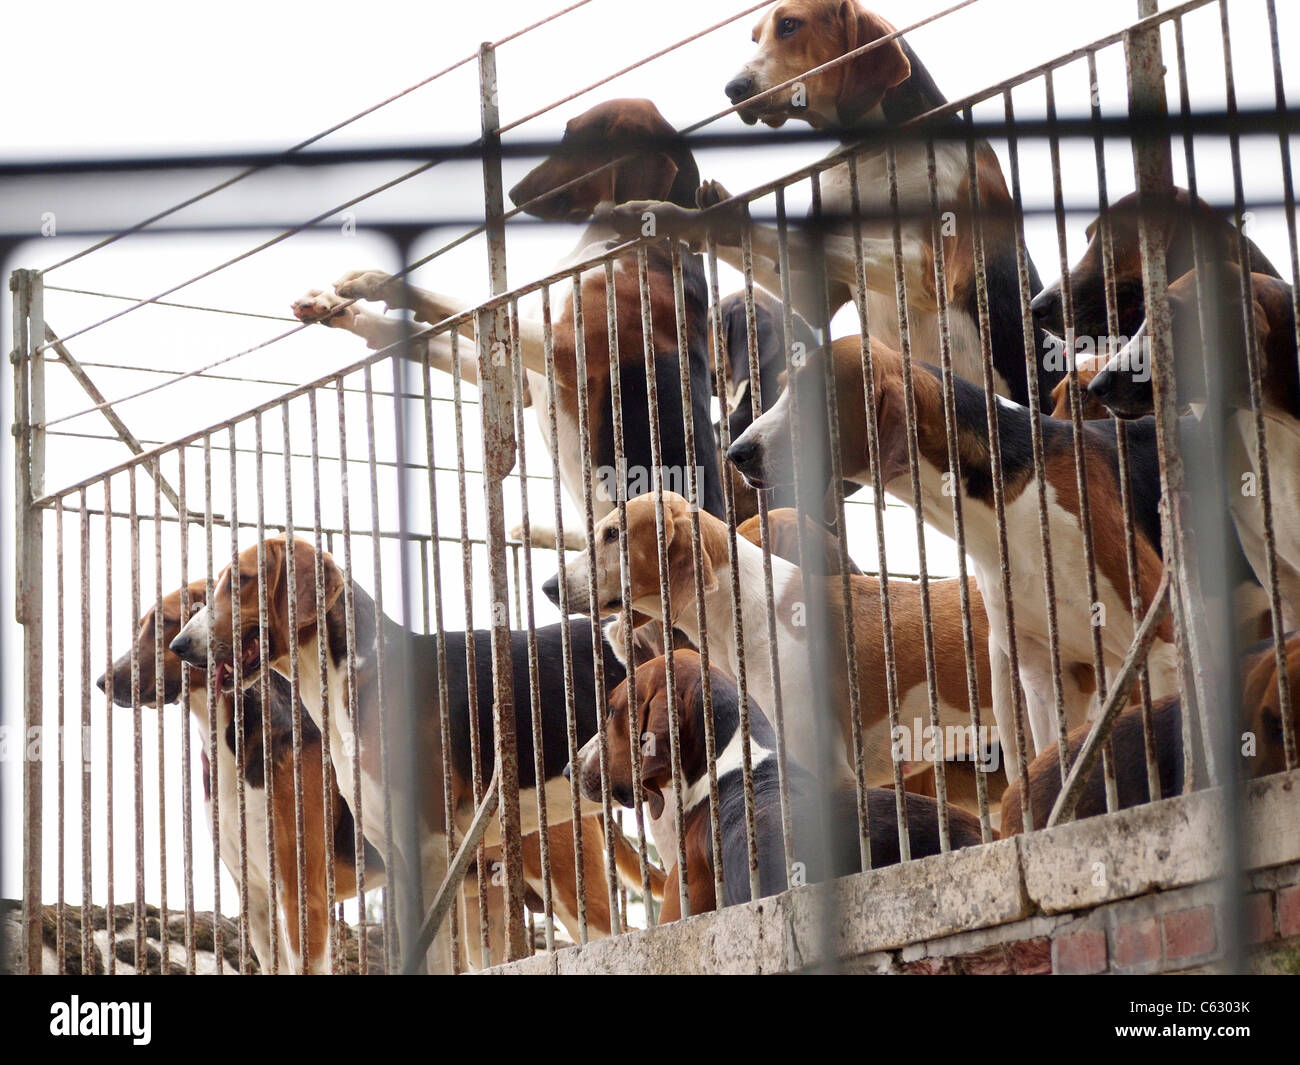 Pack of hunting dogs in the kennel at Cheverny castle, Loire valley, France. Stock Photo